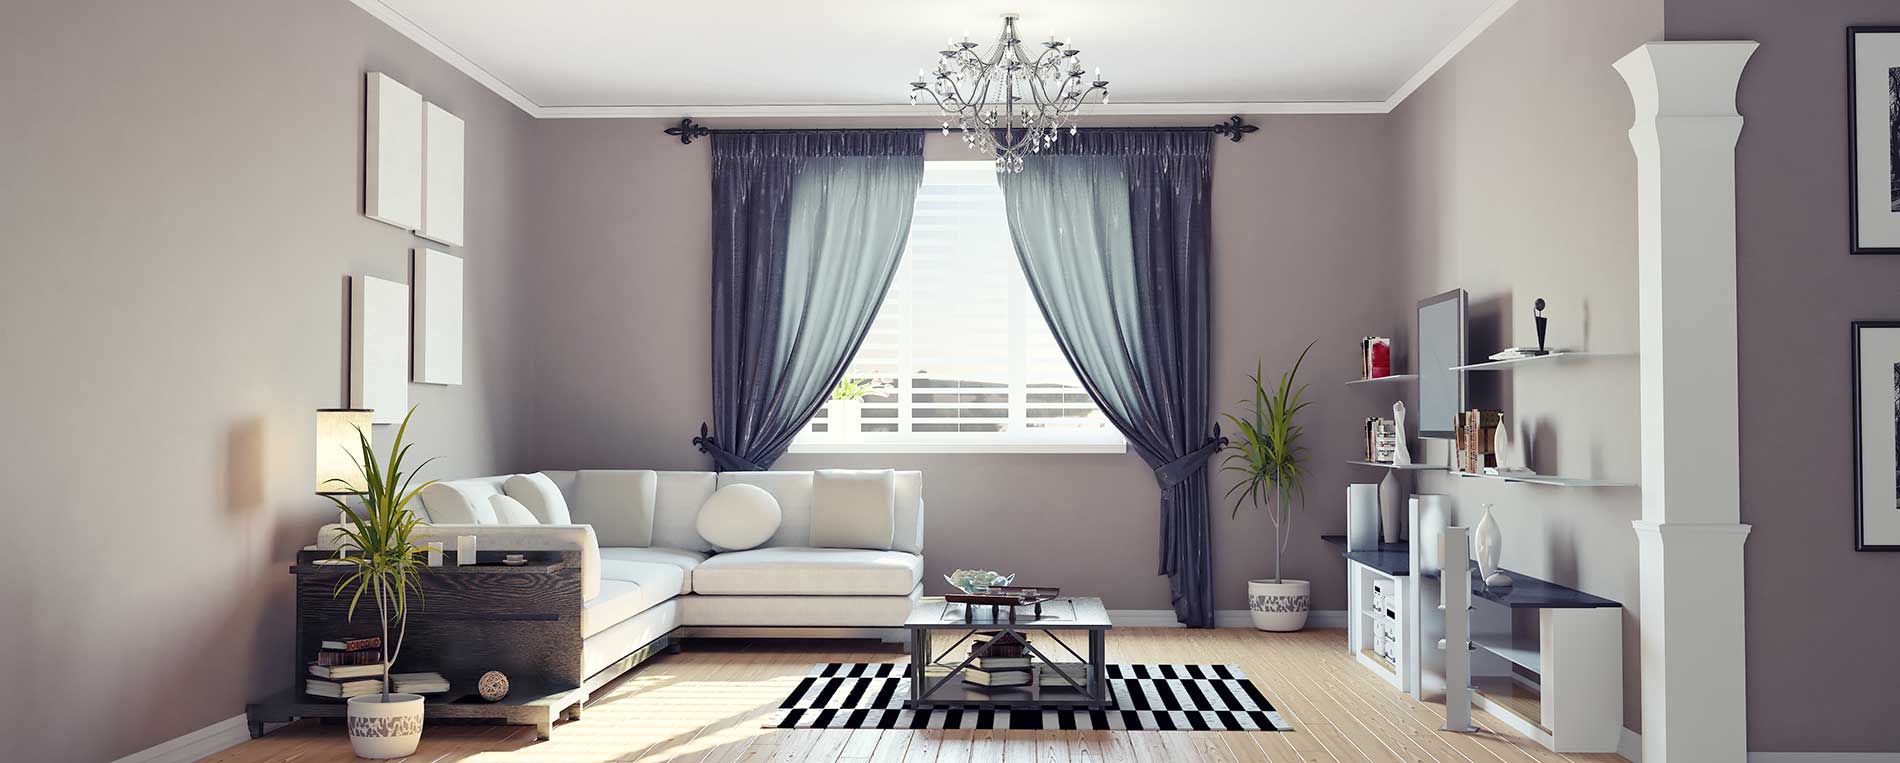 The Best Features of Cellular Shades